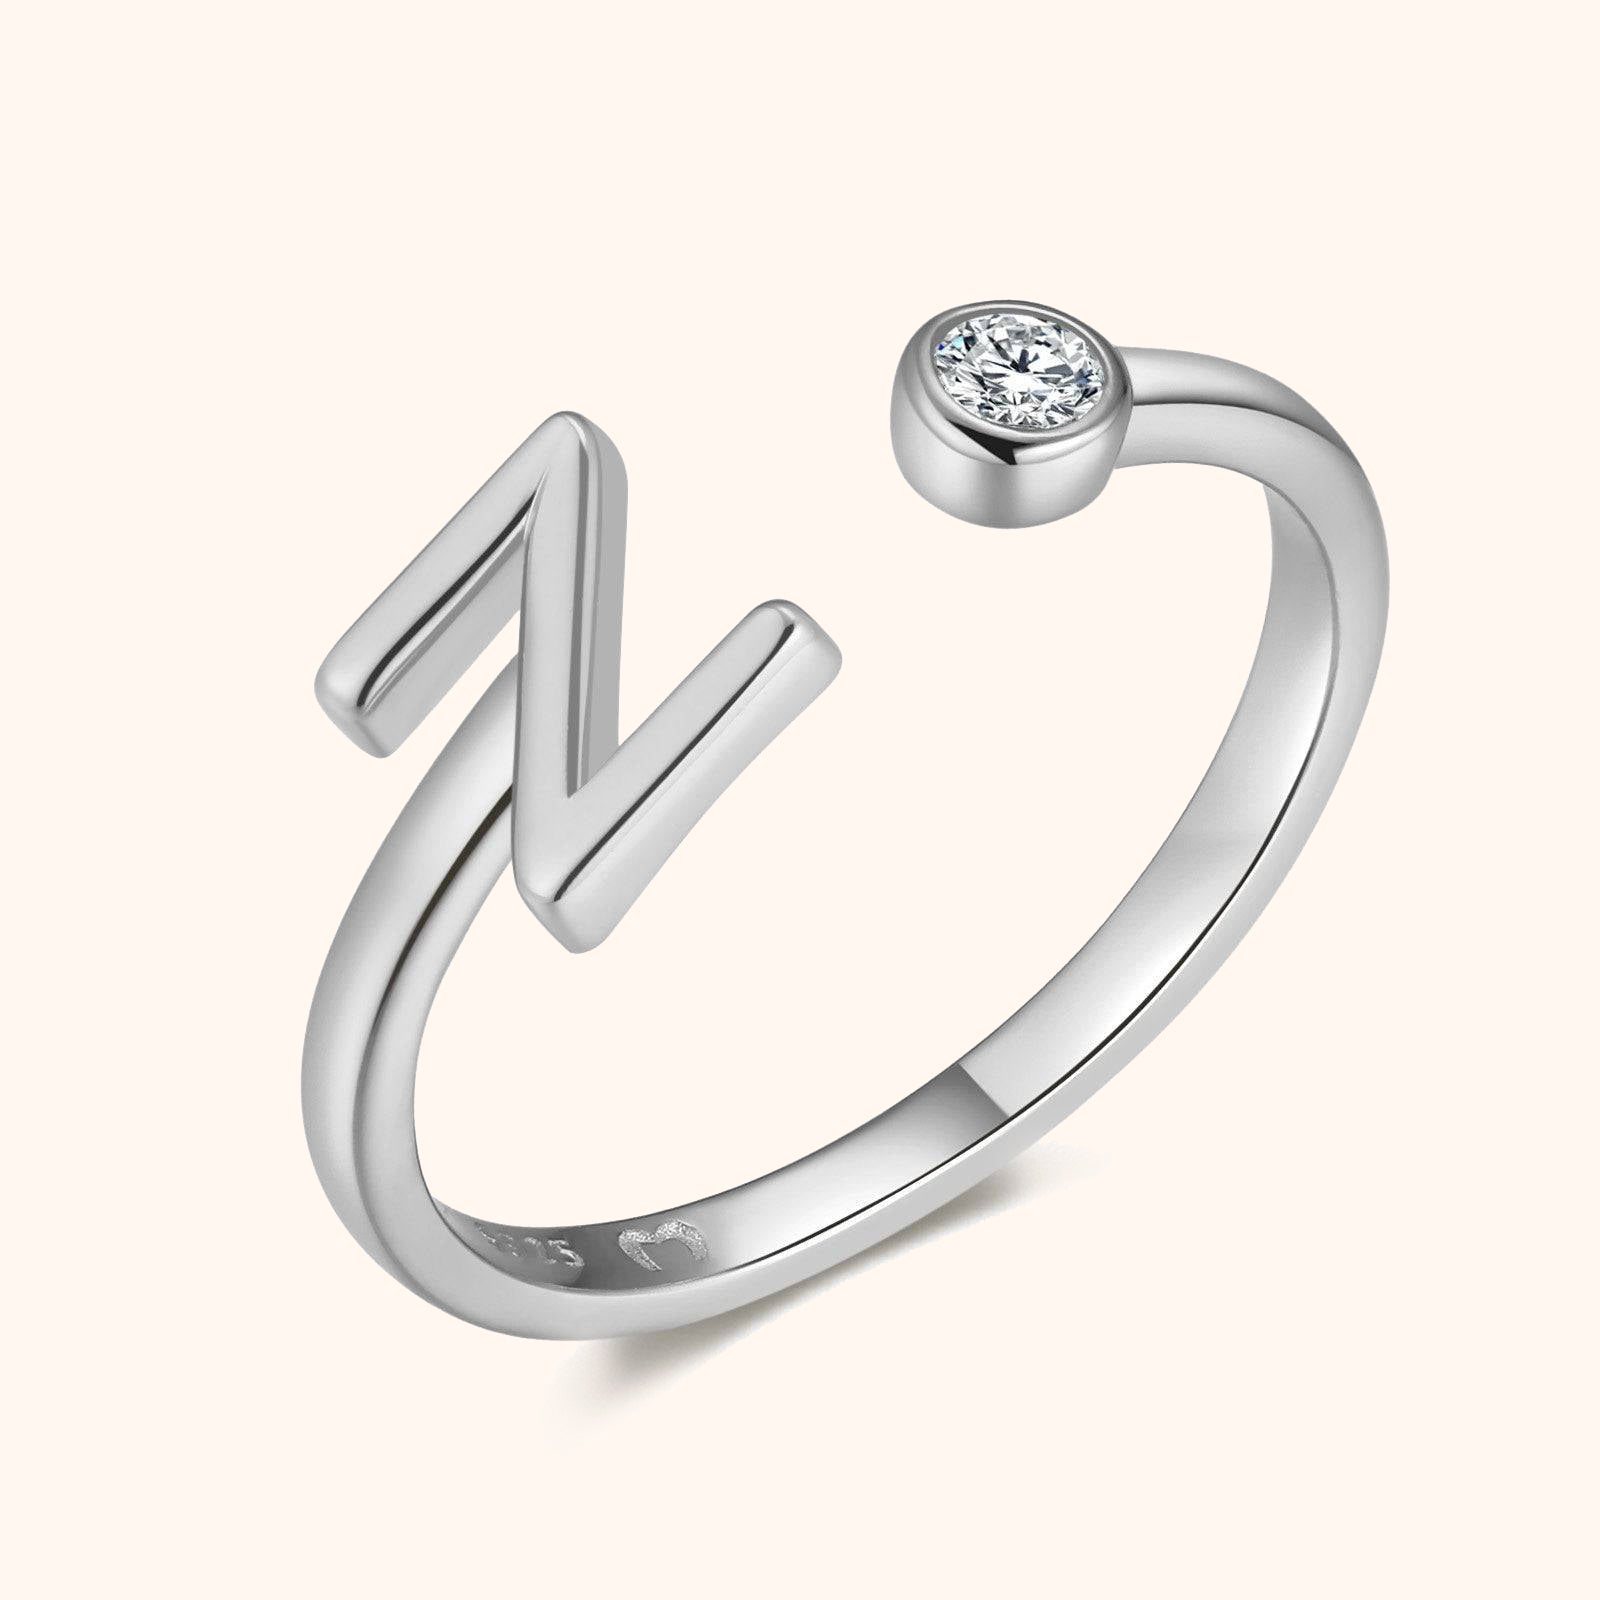 "Top Letter" Ring